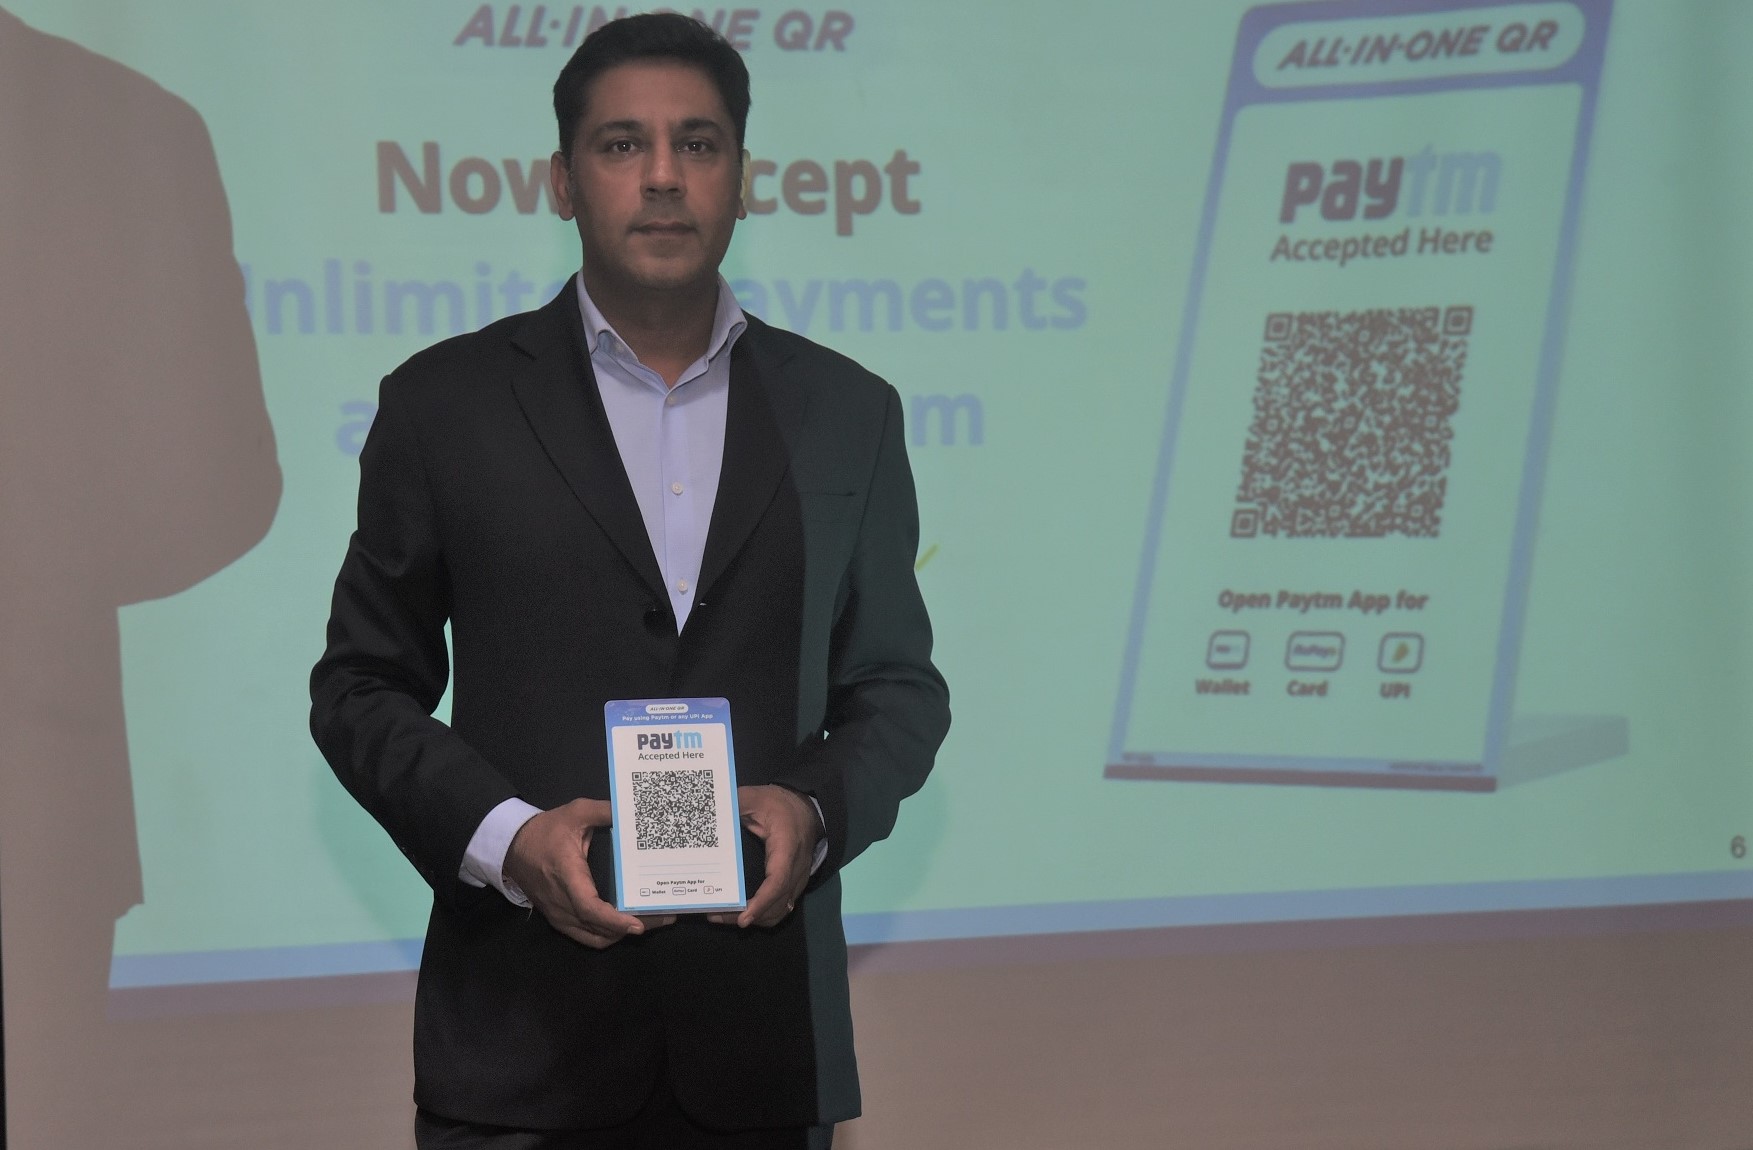 Paytm empowers over 2 million merchants in Eastern India with its All-in-One QR